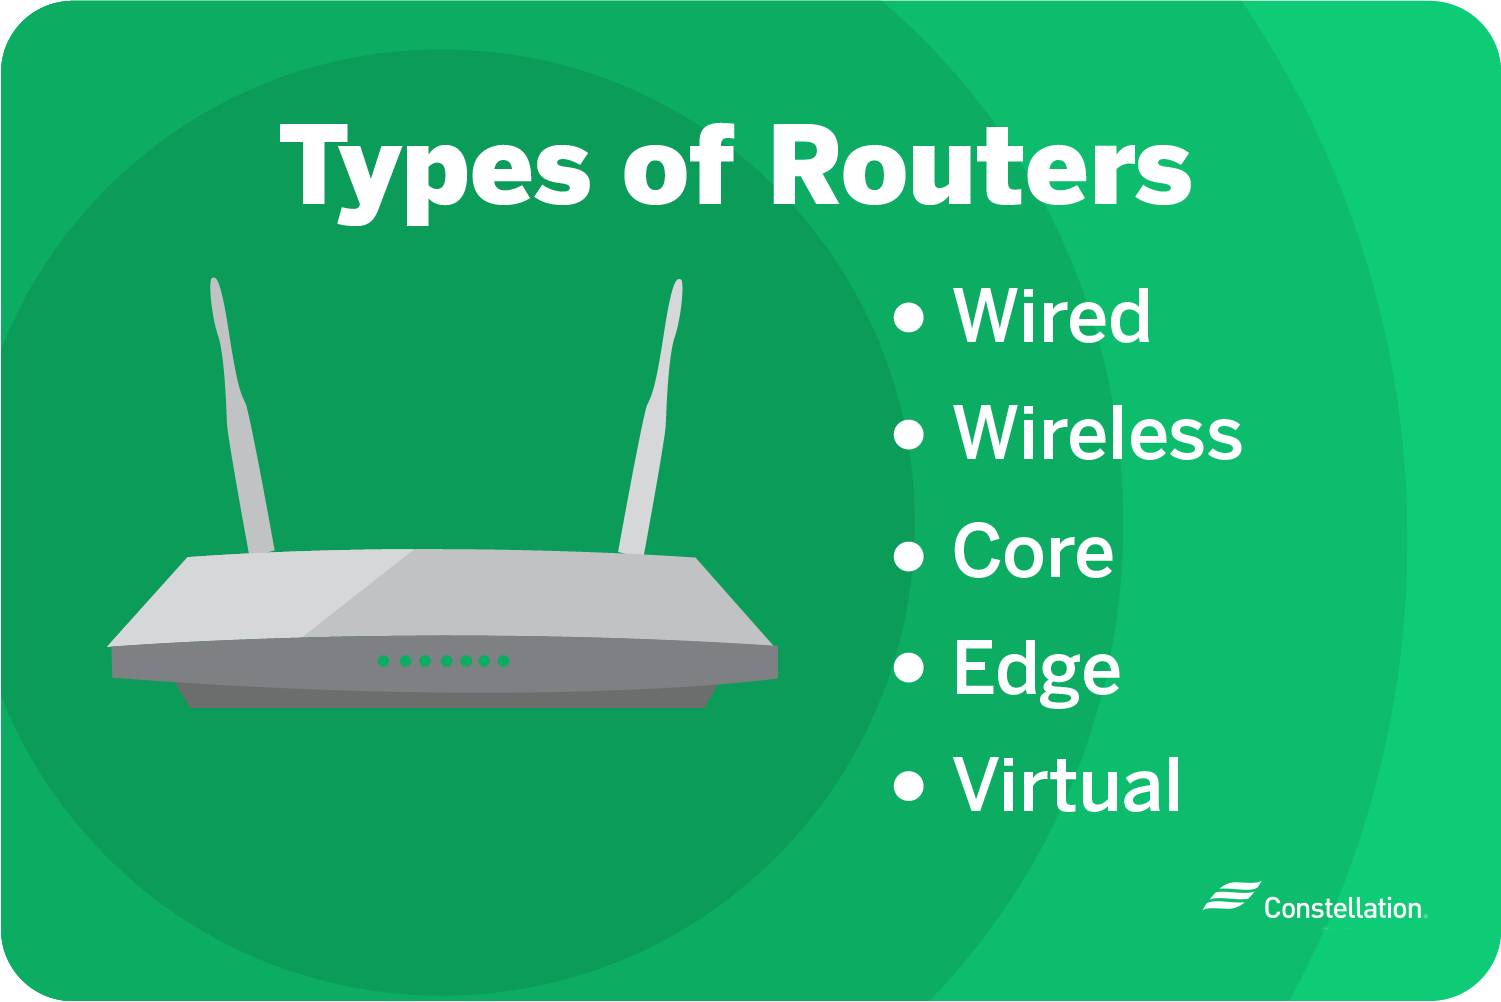 There are wired, wireless, core, edge, and virtual types of routers